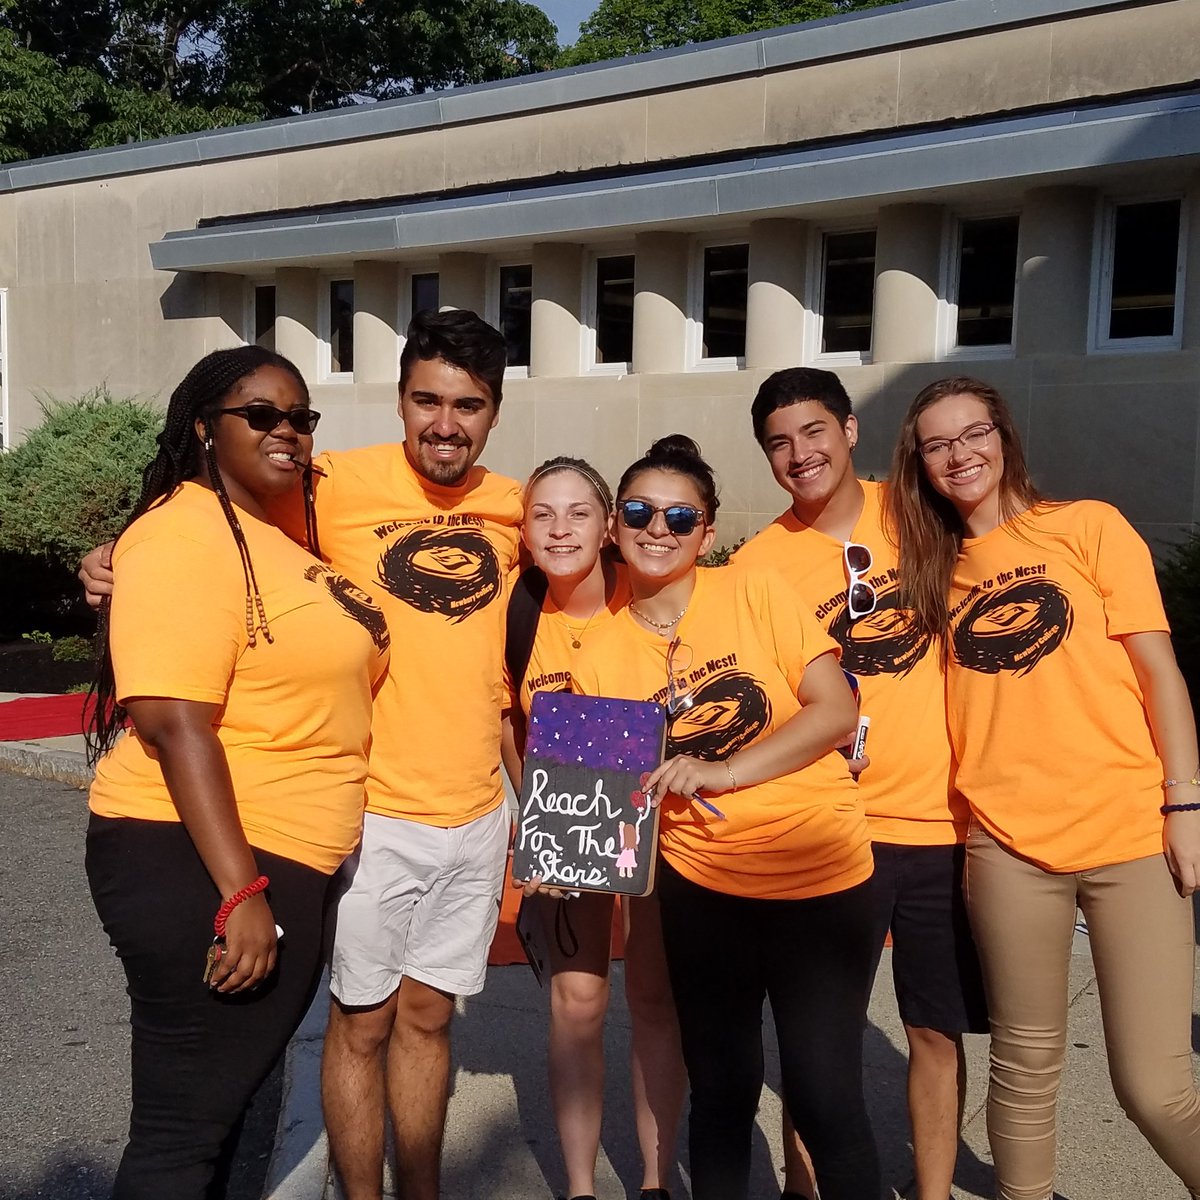 Welcome Class of #newbury22! The move-in crew is ready for you! @NewburyColl @moveinday